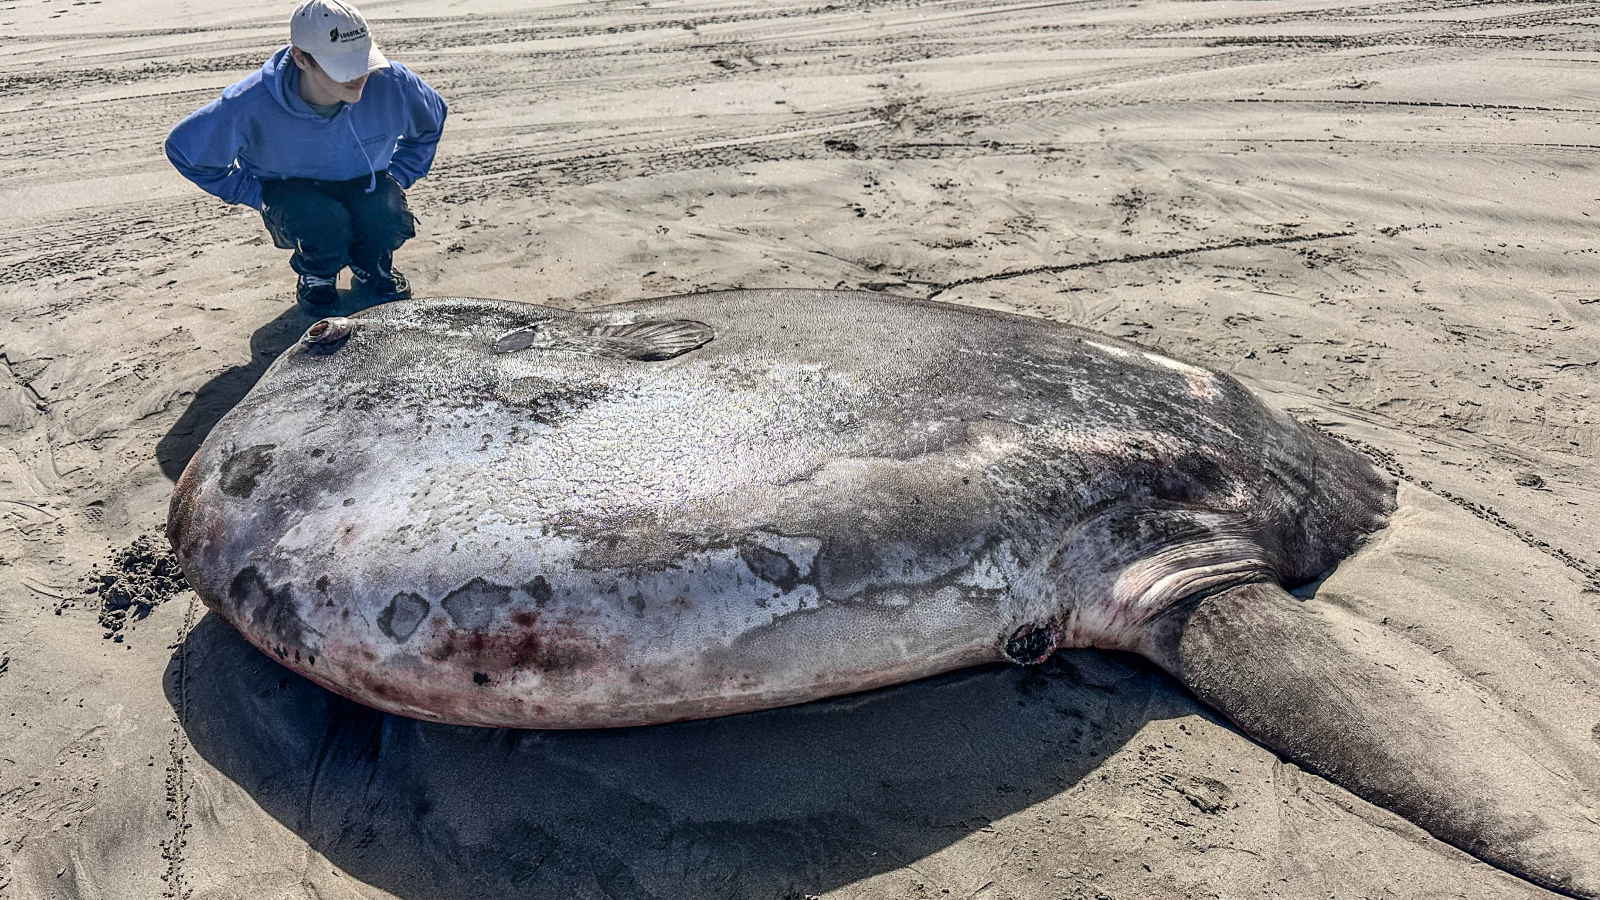 Gigantic sunfish that washed up on Oregon beach could…